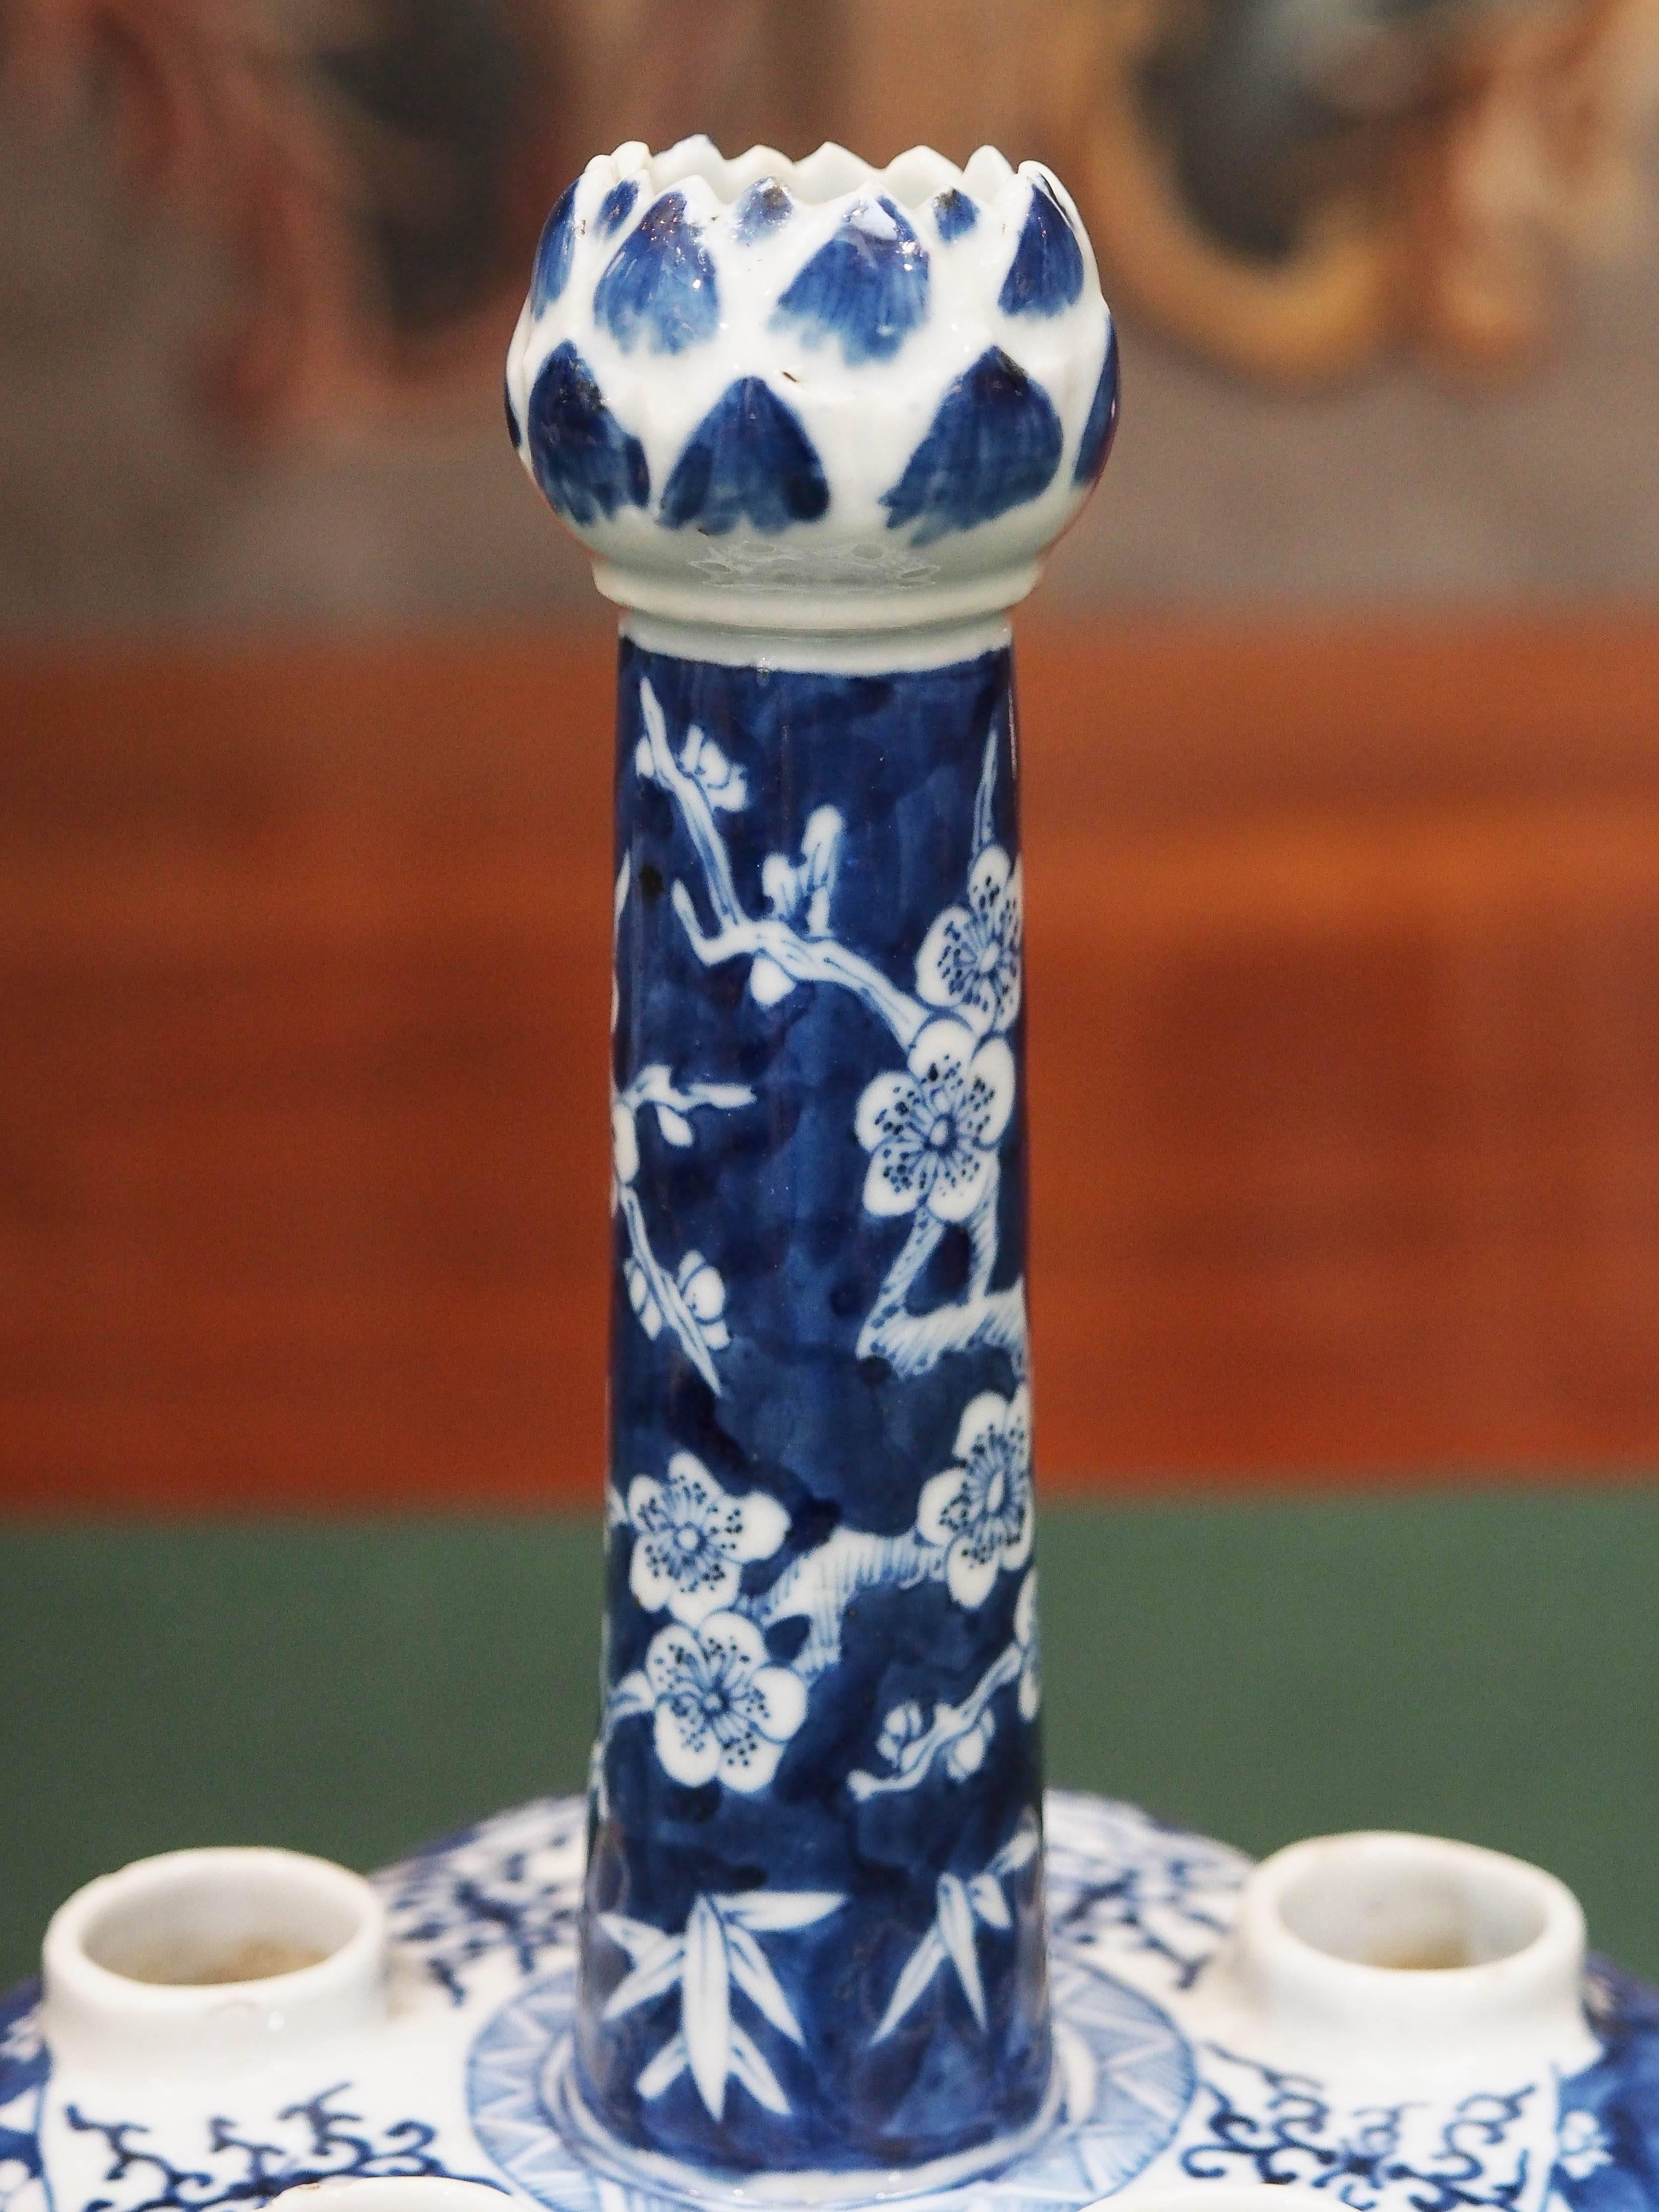 19th century Chinese blue and white tulipiere with cherry blossom motif.